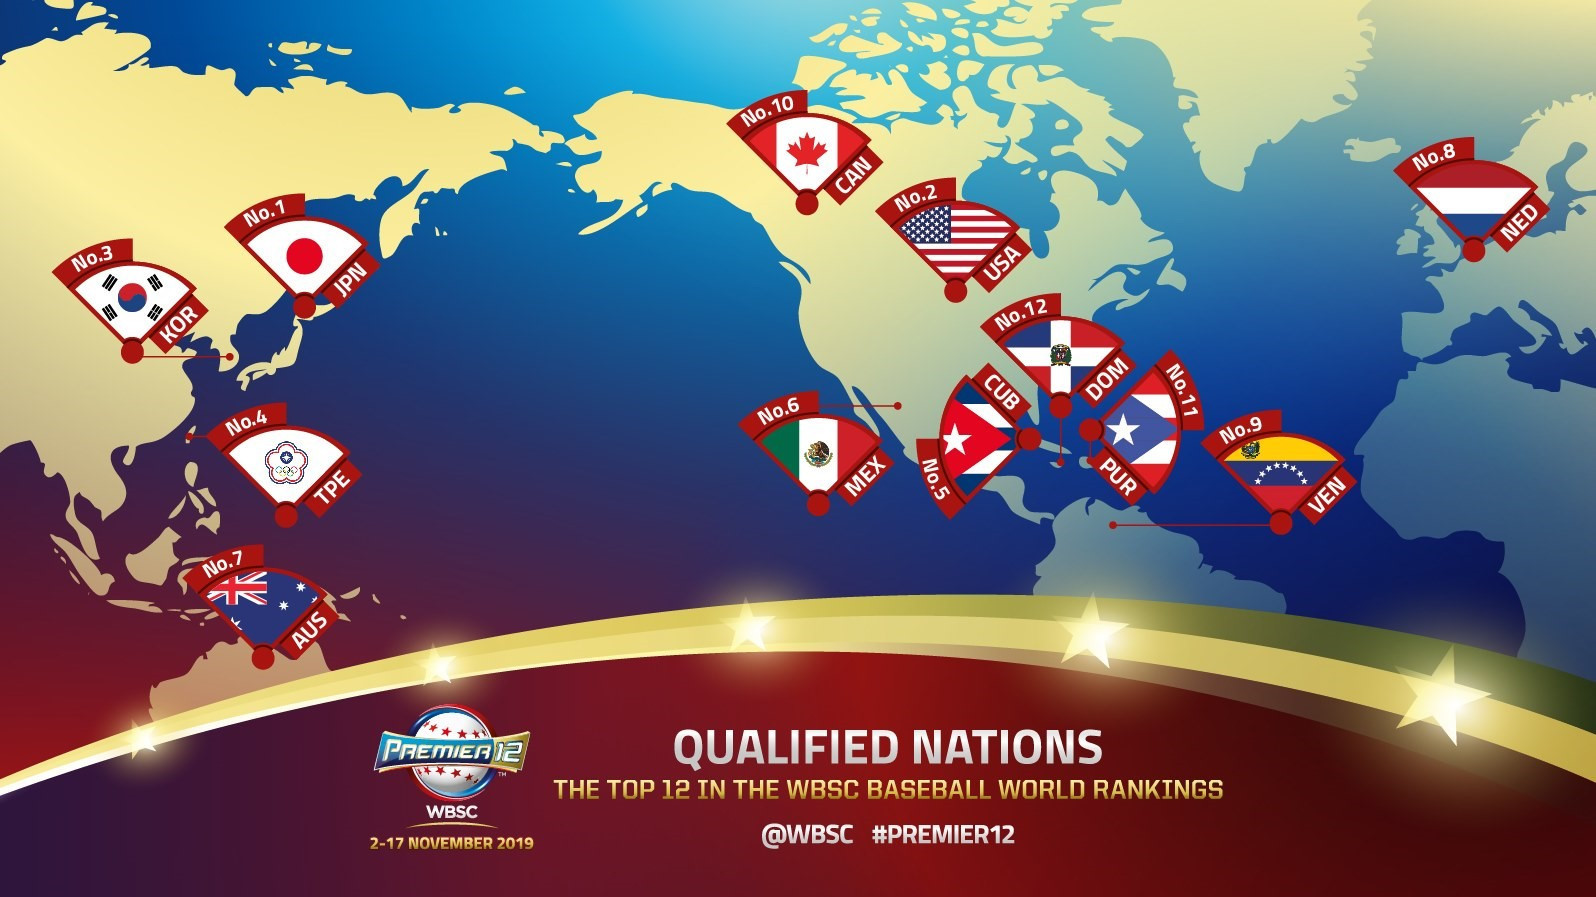 WBSC confirm qualifiers for second edition of Premier12